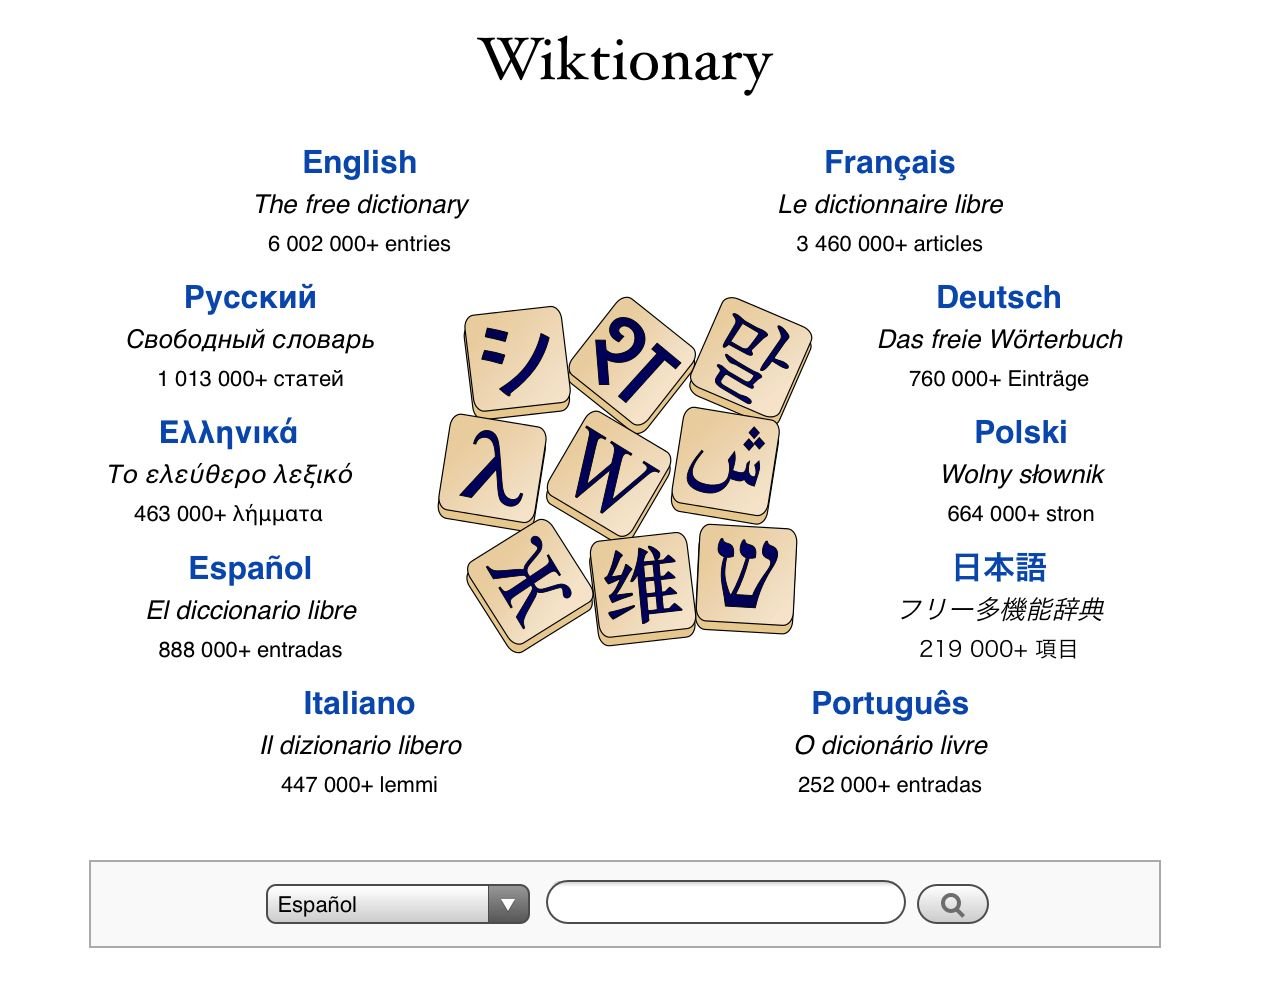 open - Wiktionary, the free dictionary